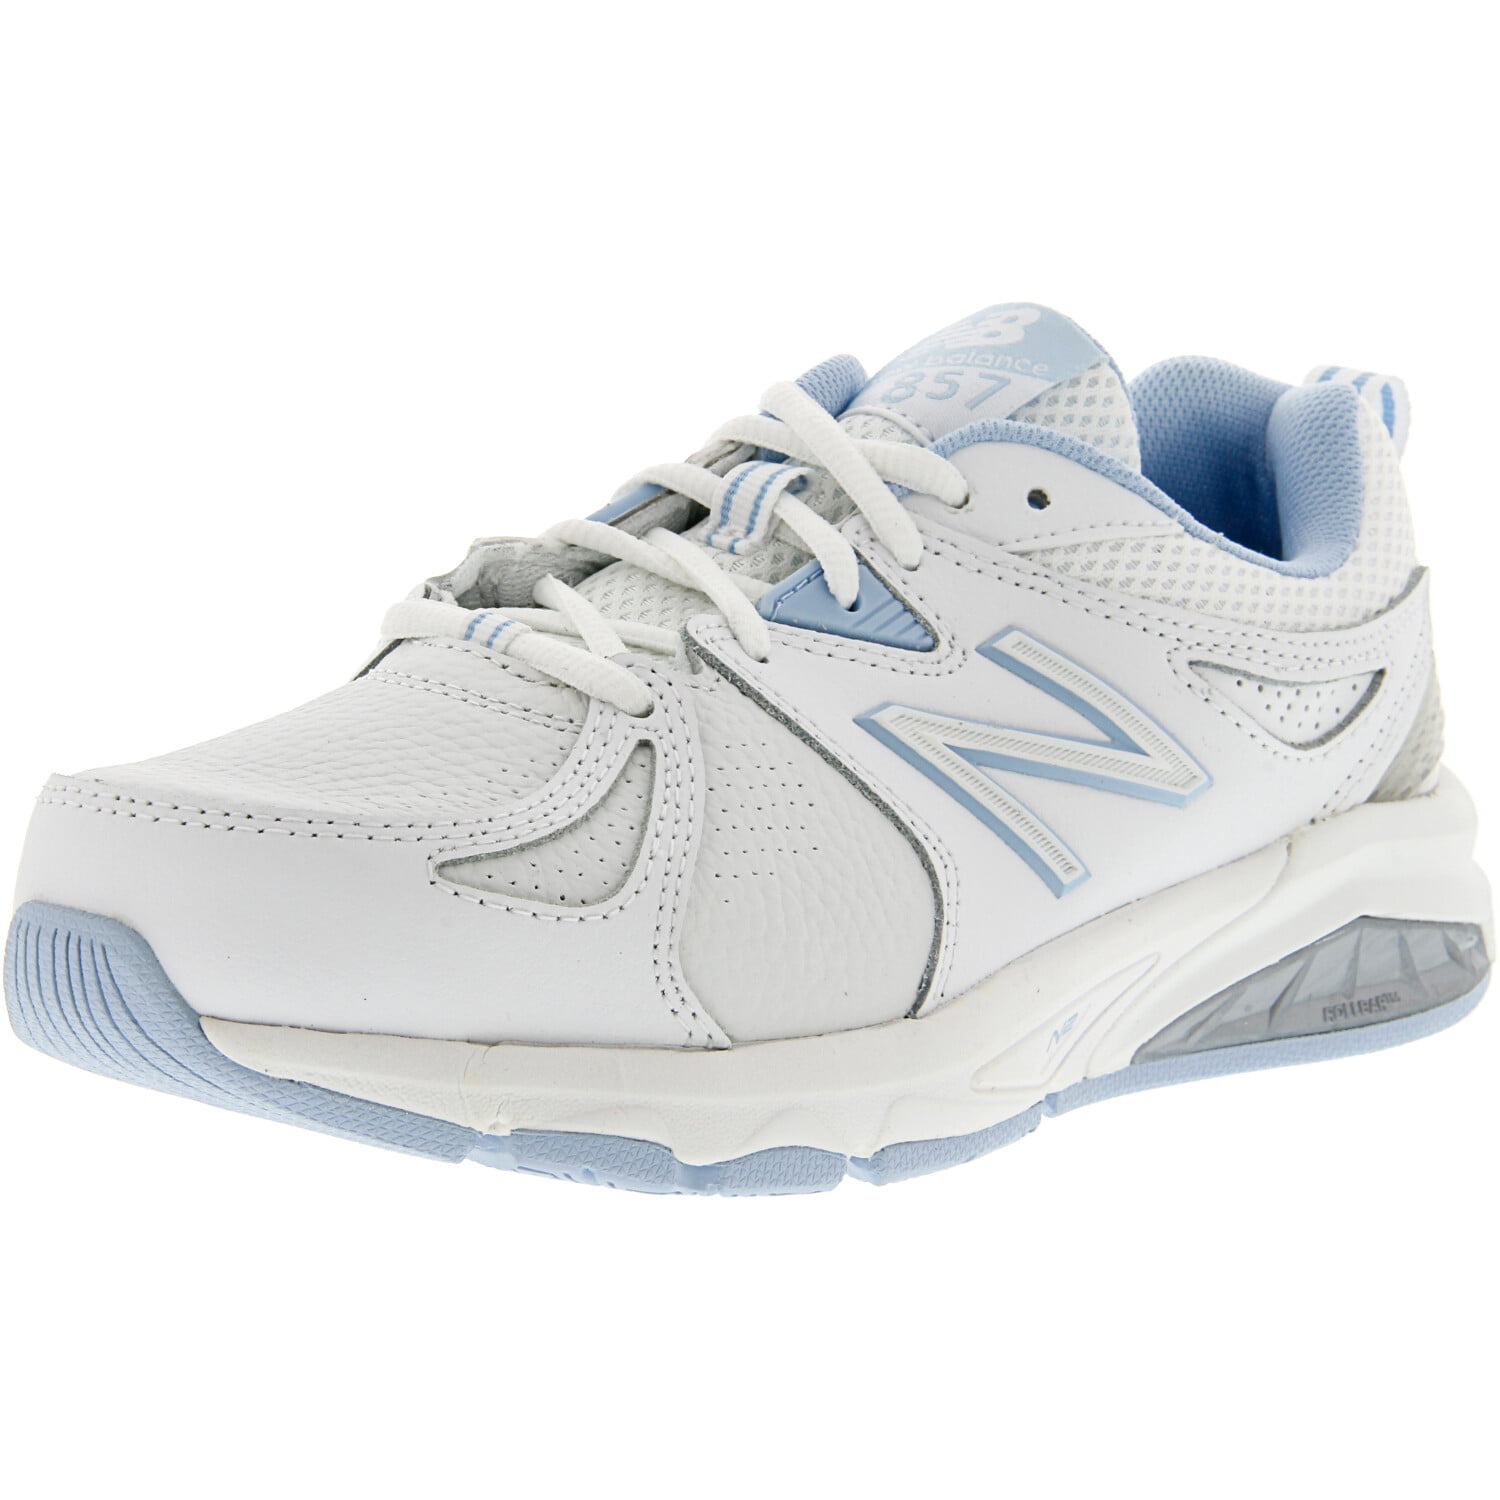 New Balance Women's X857 Wb2 Ankle-High 